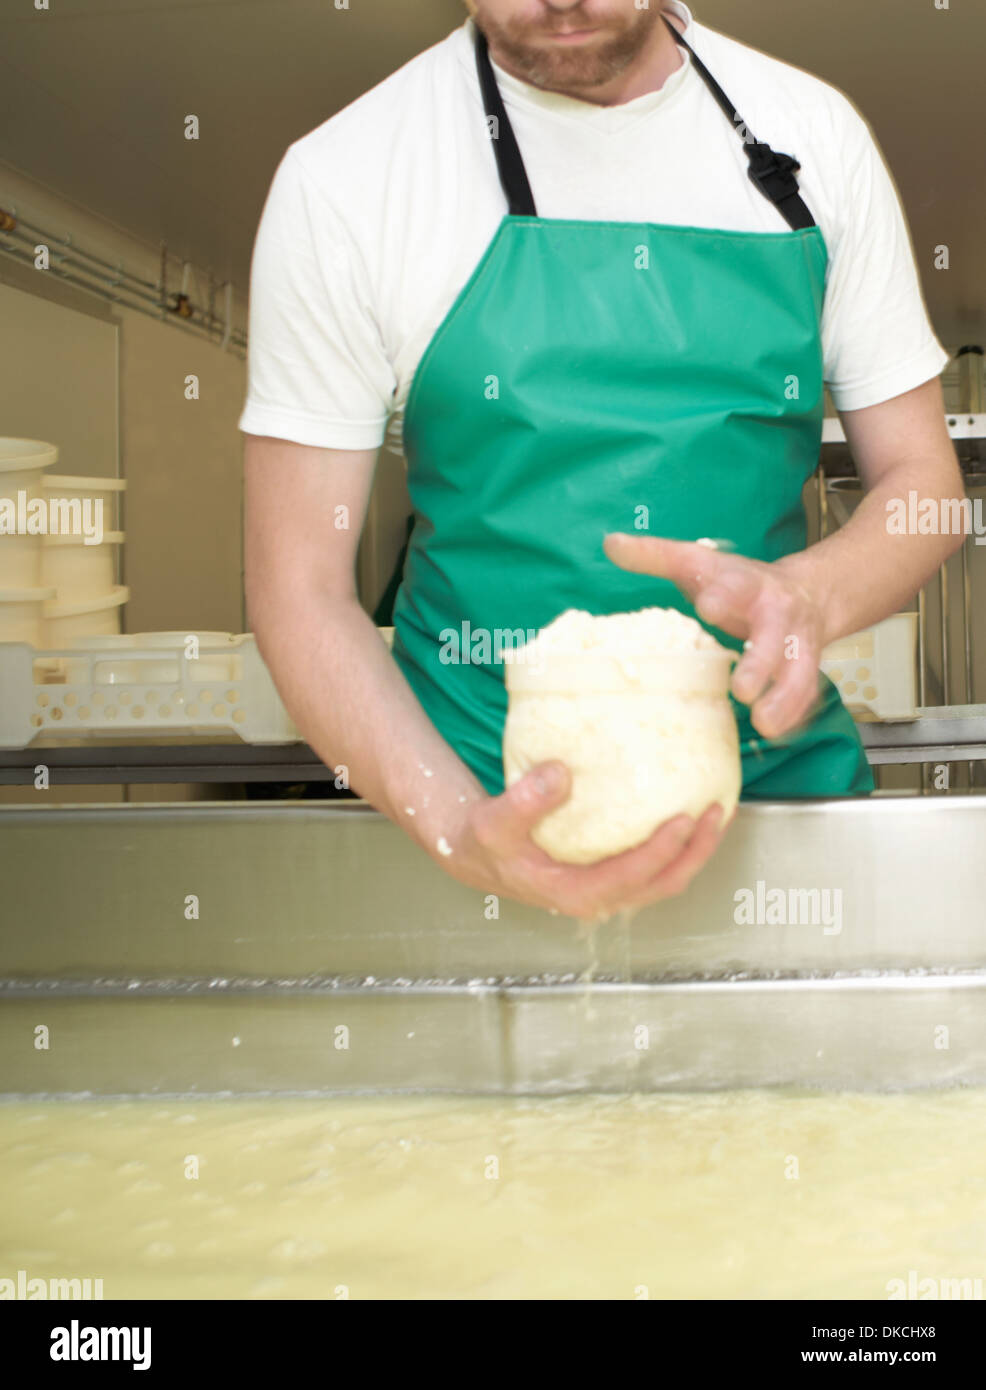 Cheesemaker moulding curds at farm factory Stock Photo